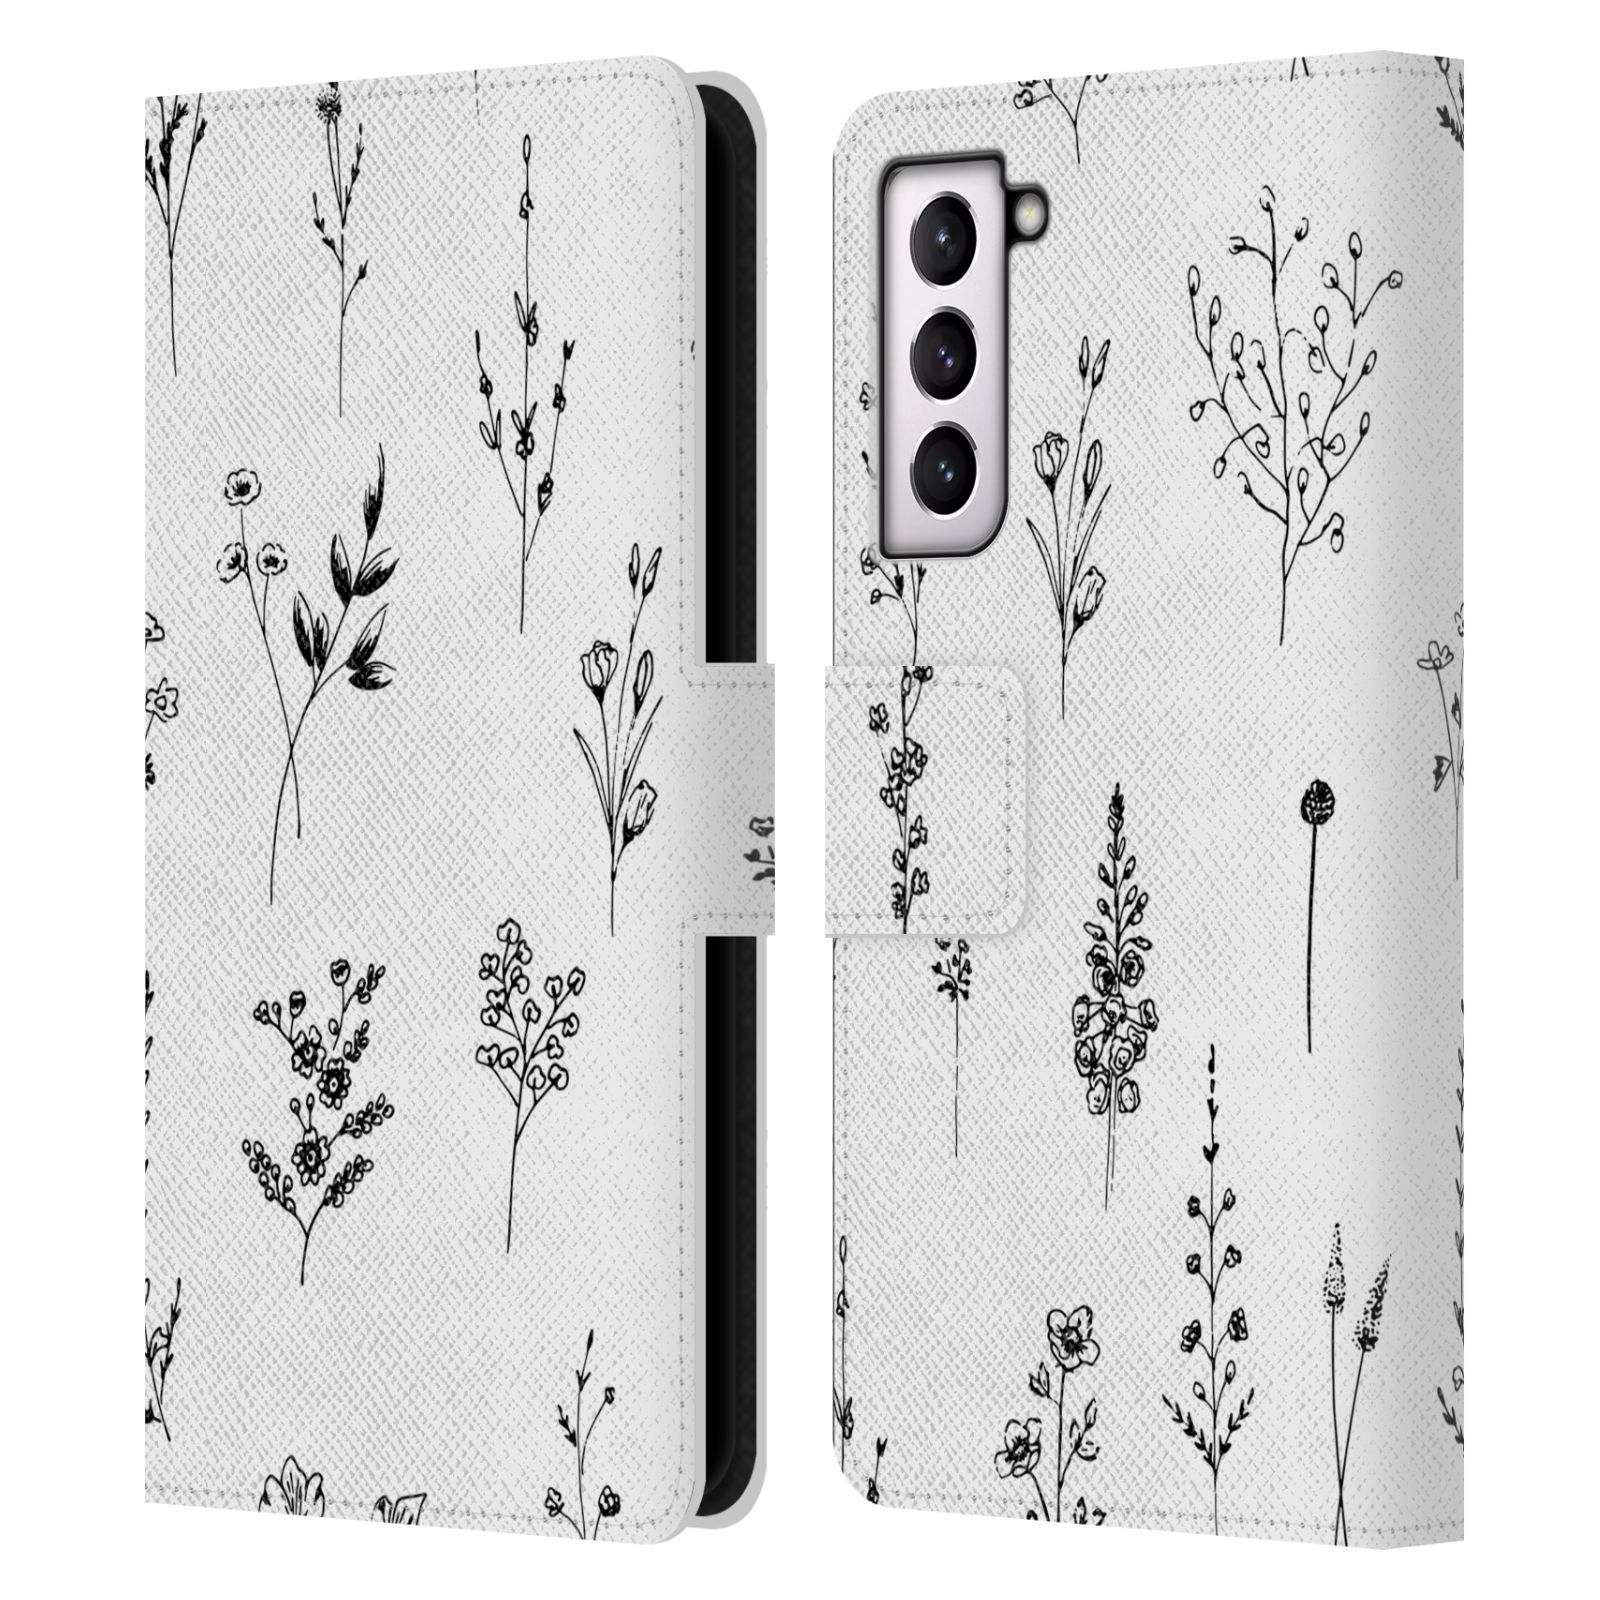 ANIS ILLUSTRATION BLOOMERS LEATHER BOOK WALLET CASE COVER FOR 